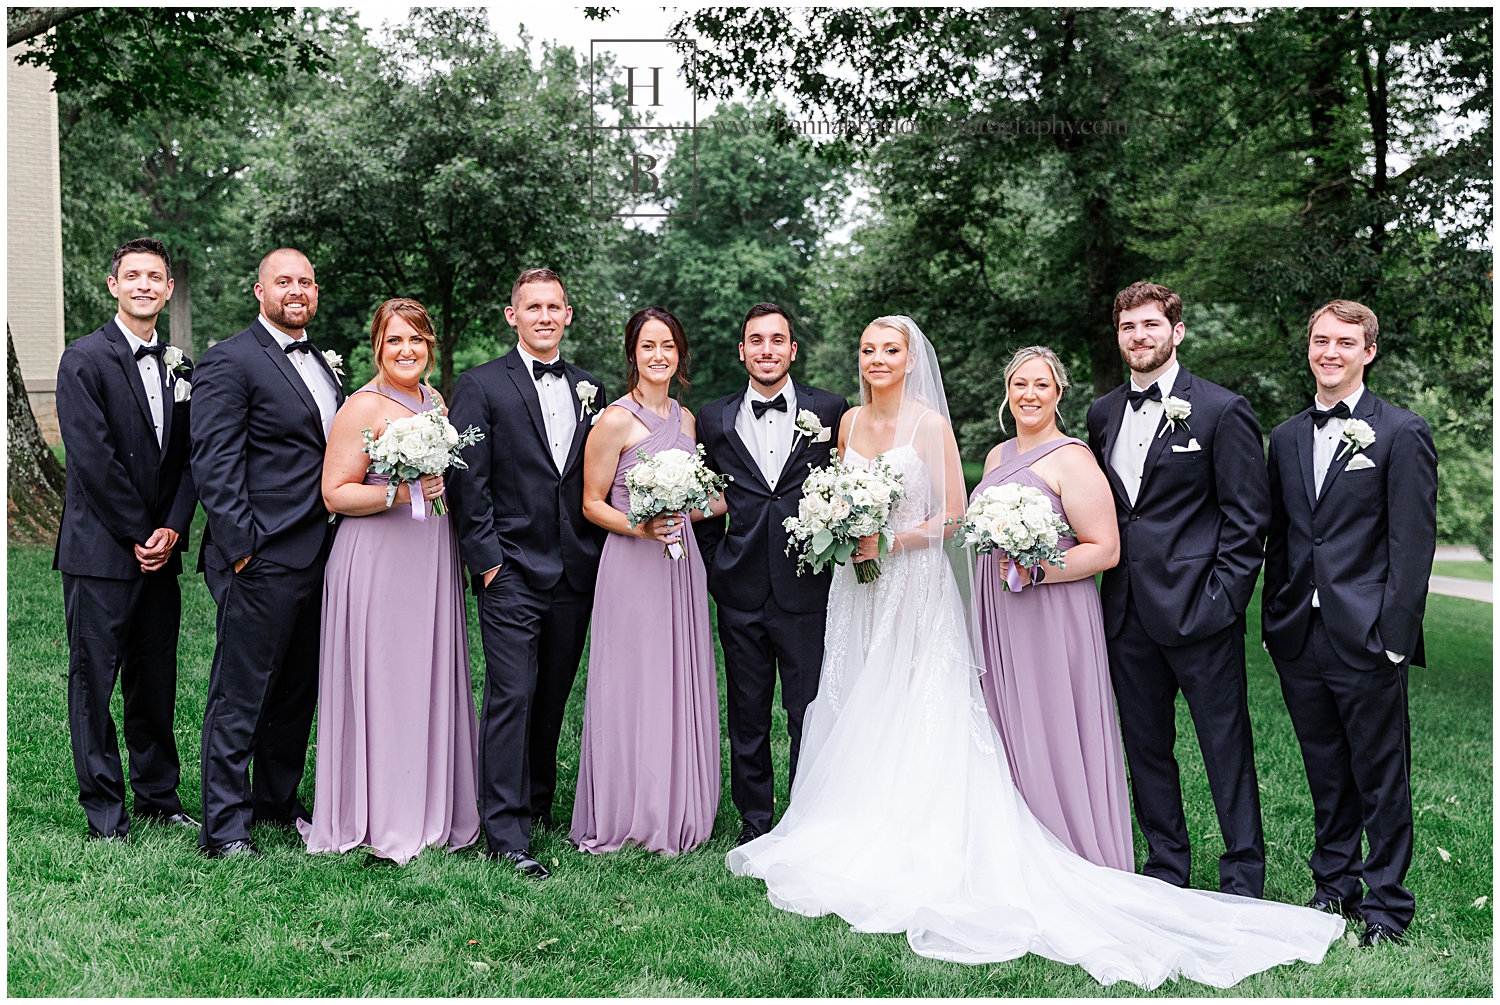 Bridal party poses for group photo.